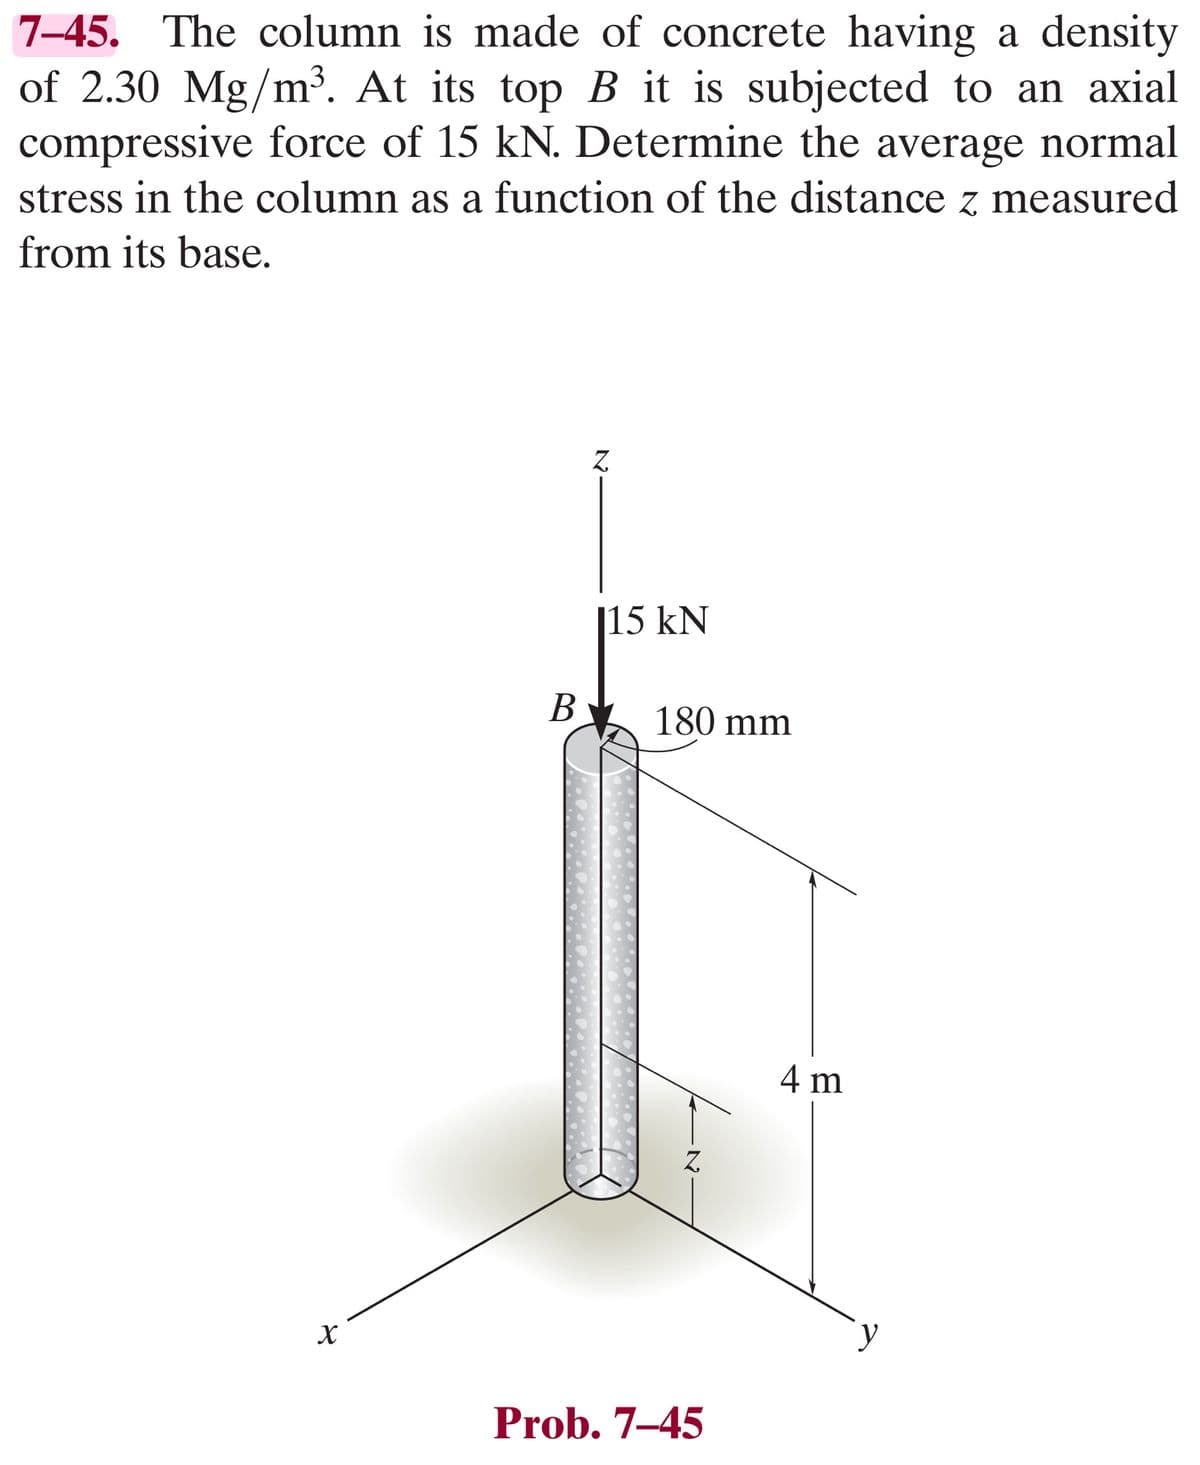 7-45. The column is made of concrete having a density
of 2.30 Mg/m³. At its top B it is subjected to an axial
compressive force of 15 kN. Determine the average normal
stress in the column as a function of the distance z measured
from its base.
X
B
Z
115 kN
180 mm
Z
Prob. 7-45
4 m